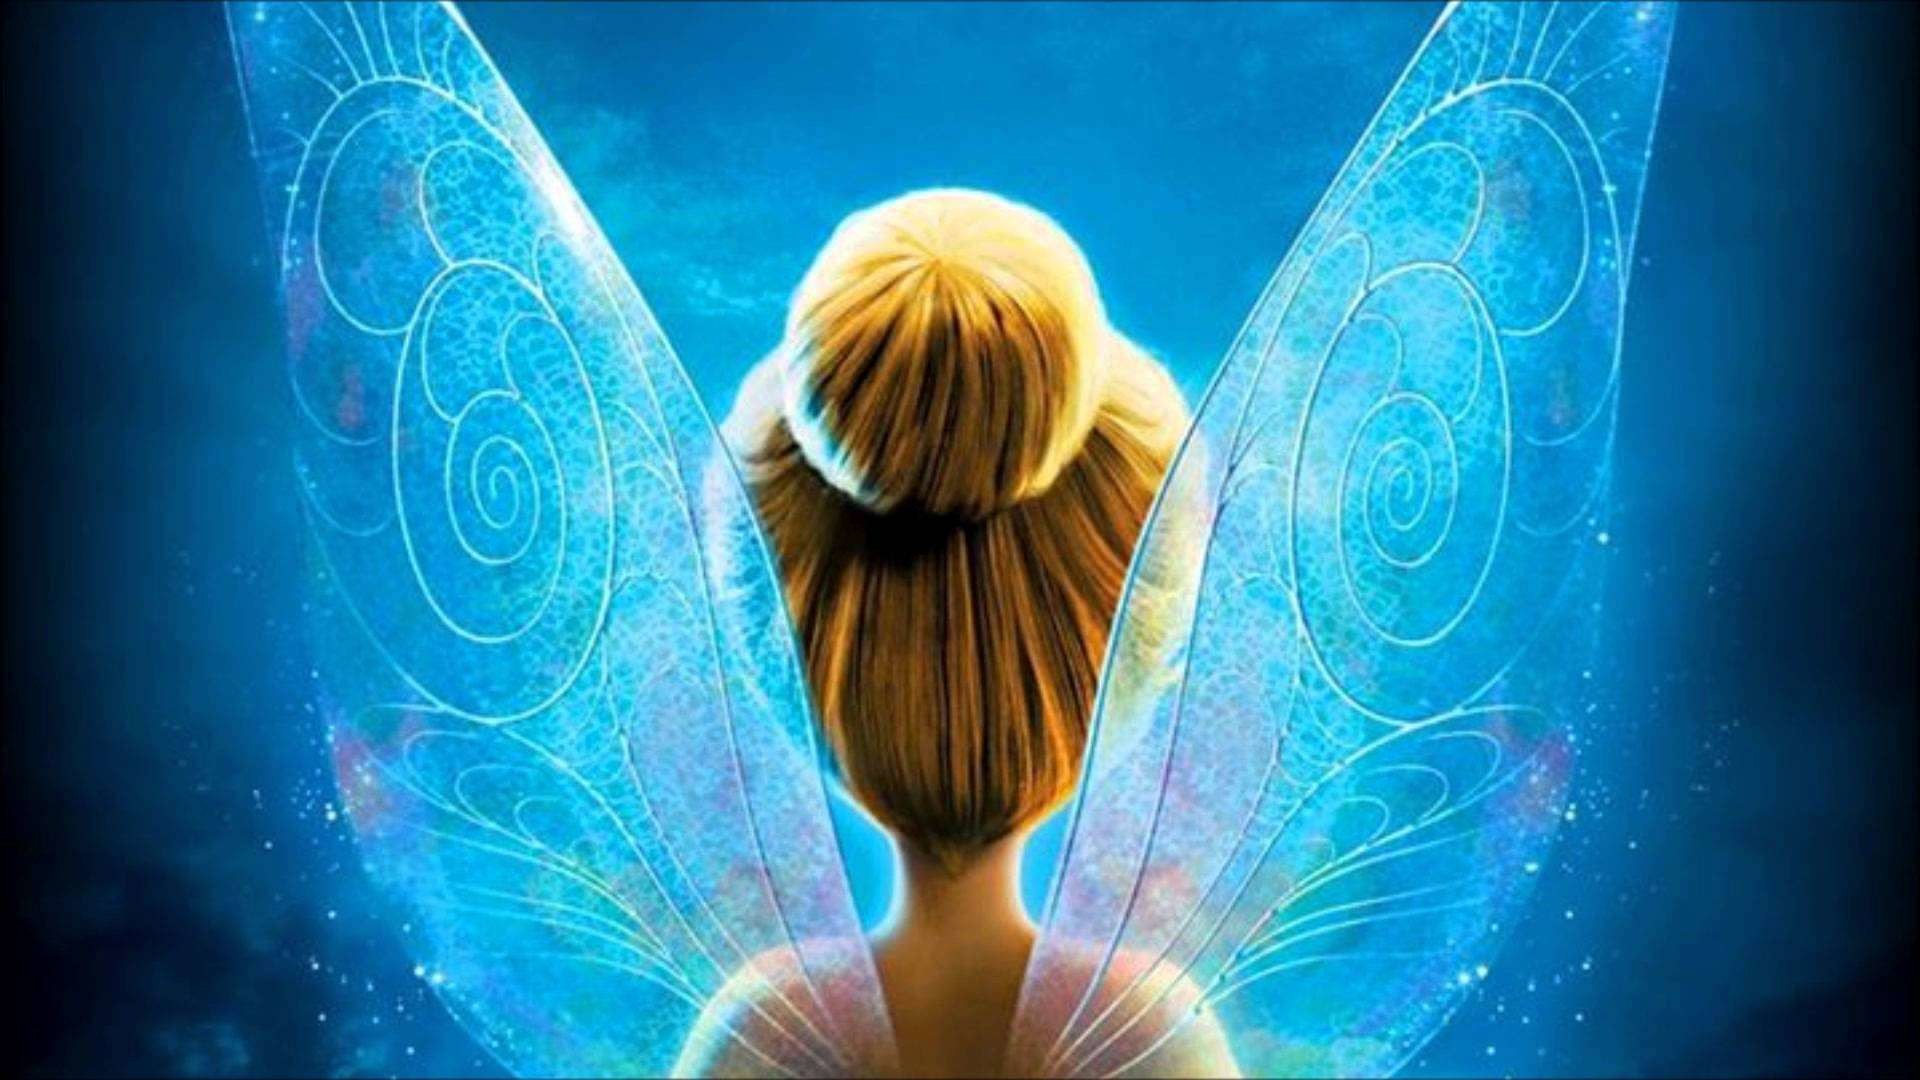 1920x1080 Tinkerbell Wallpaper HD & Tinkerbell Images Best Collection